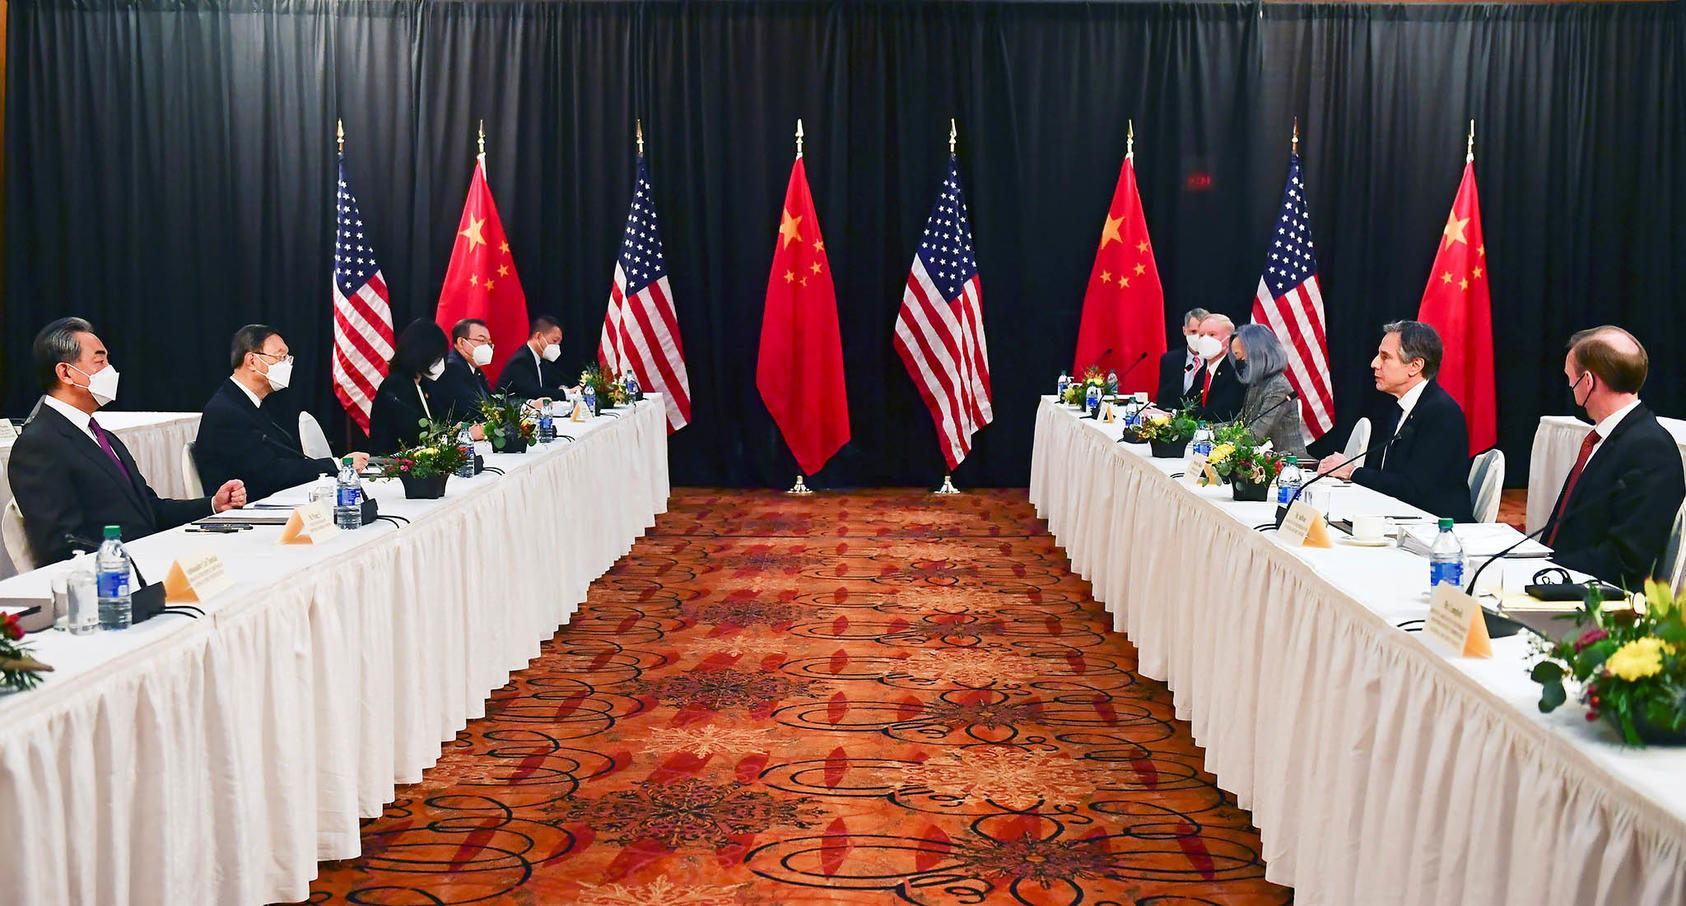 US and Chinese delegations led by US Secretary of State Antony Blinken, second from right, and Yang Jiechi, director of the Central Foreign Affairs Commission Office, second from left, met for talks in Anchorage, Alaska, on March 18, 2021. (Pool photo by Frederic J. Brown/Reuters)